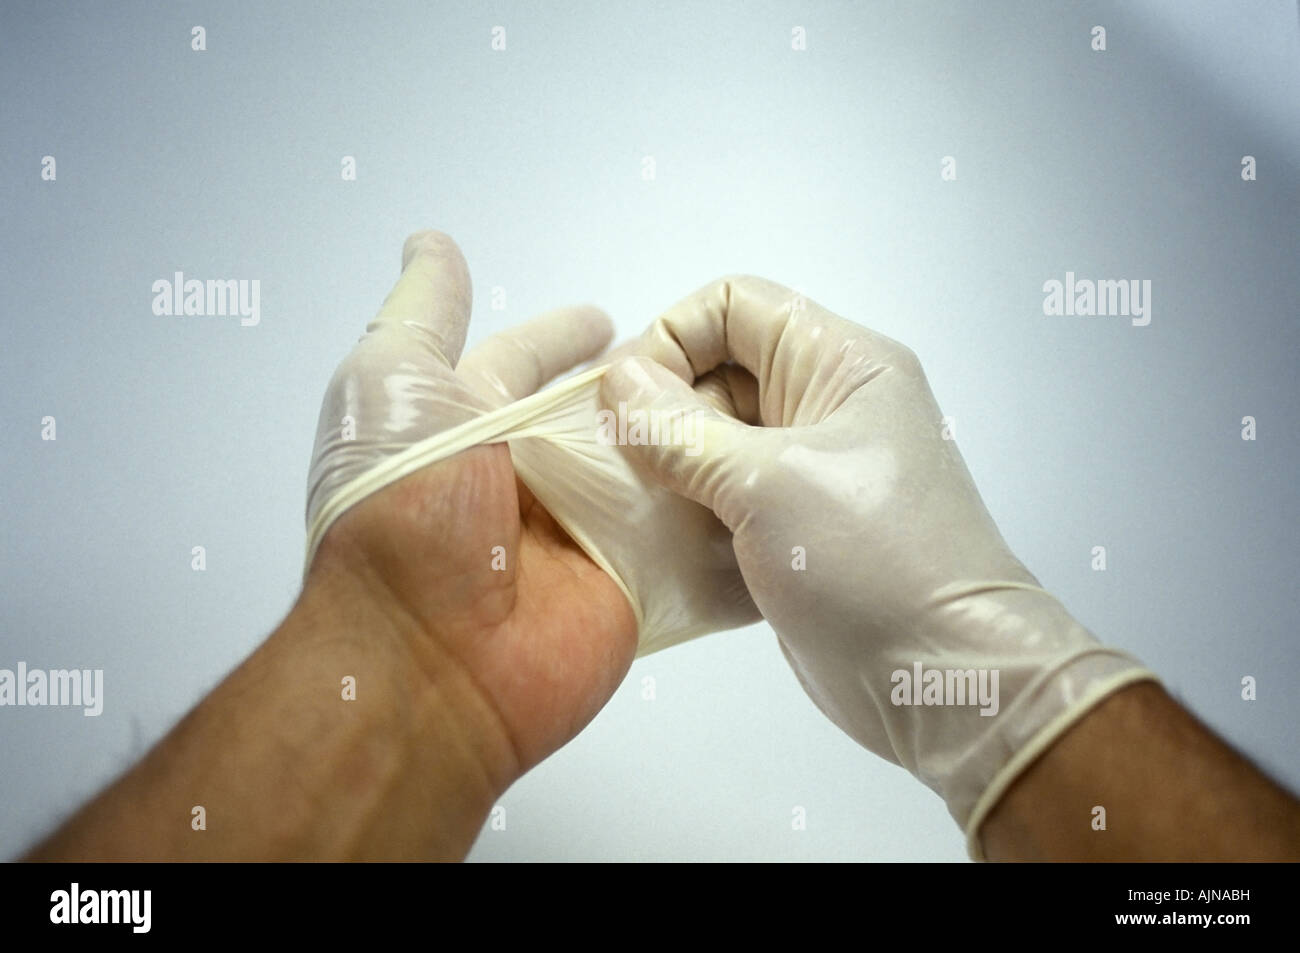 Removing putting on latex surgical gloves Stock Photo - Alamy